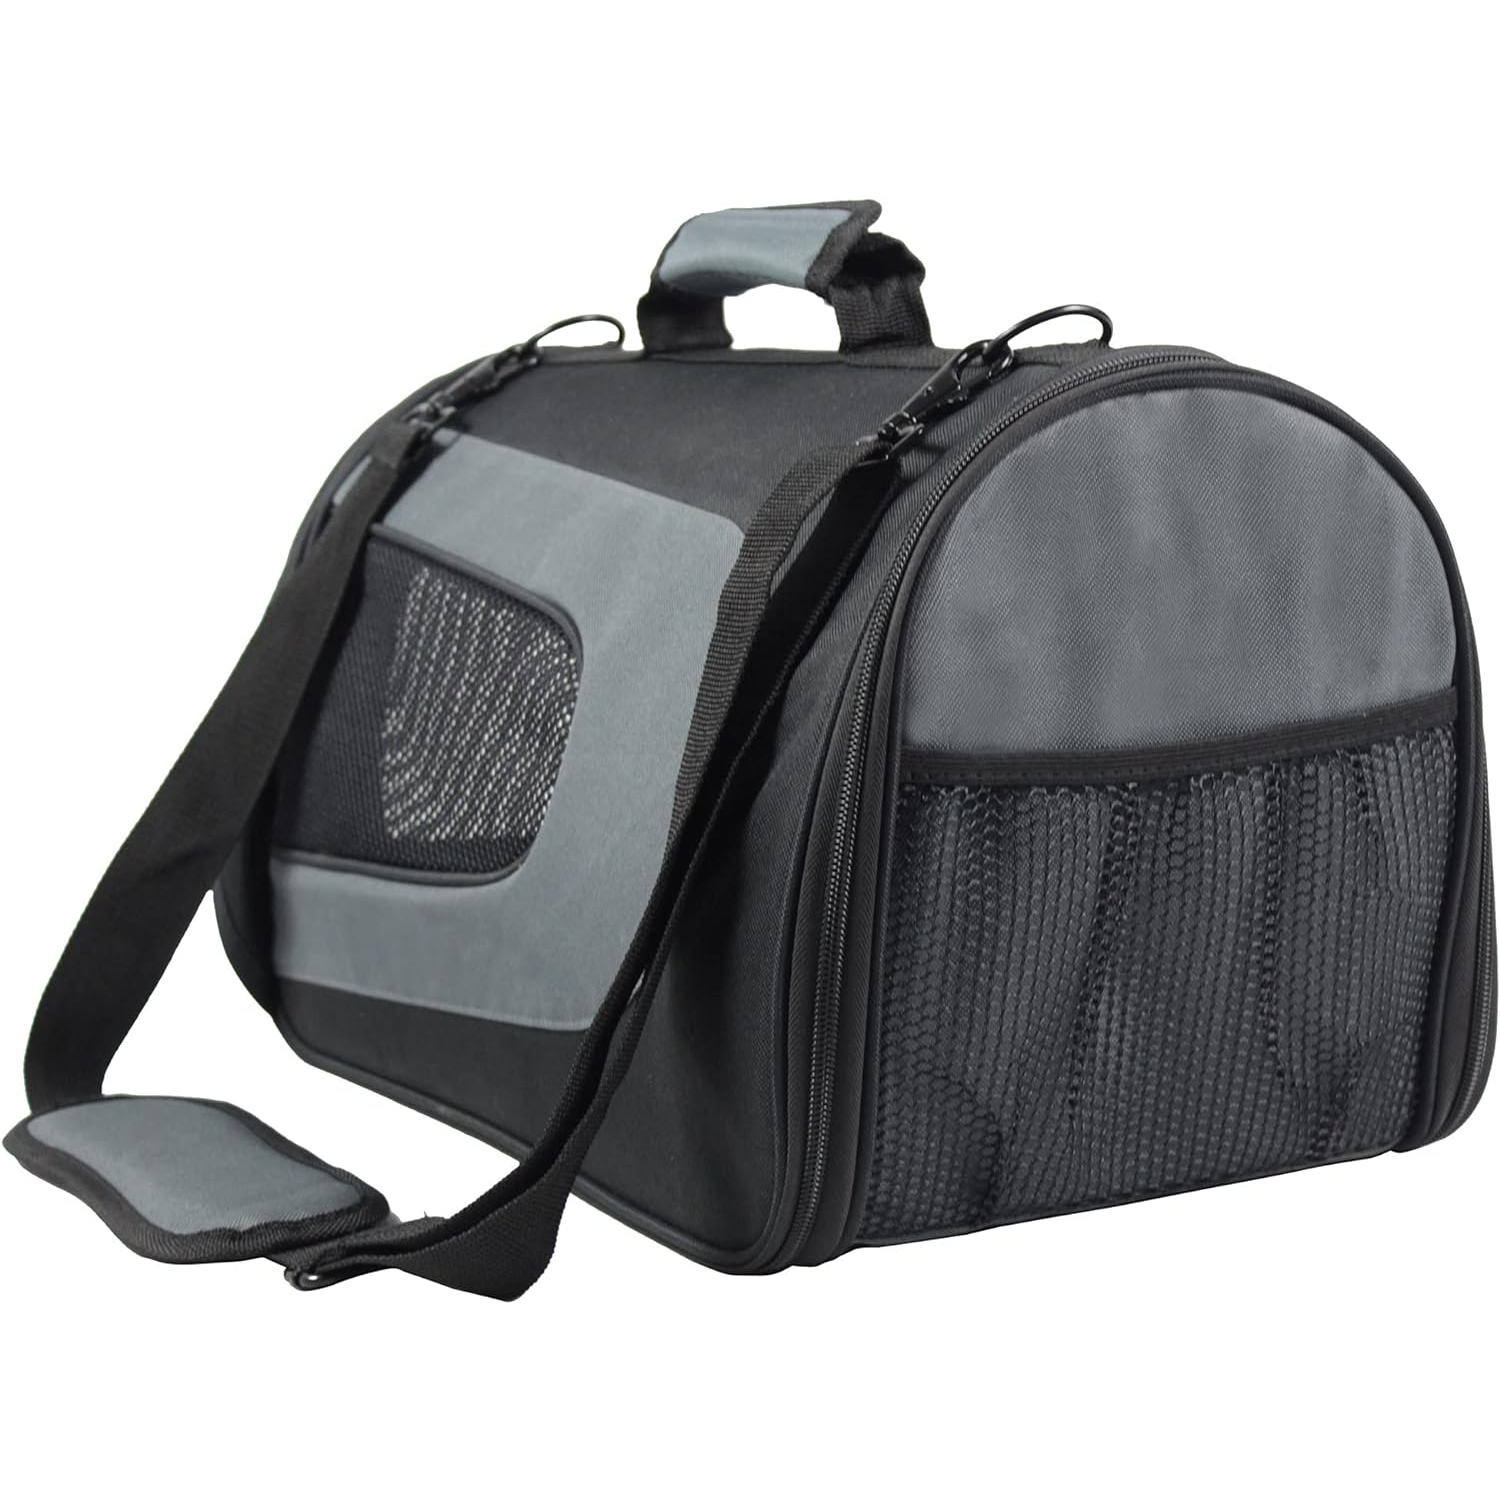 EliteField Deluxe Soft Pet Carrier (3 Year Warranty, Airline Approved), Multiple Sizes and Colors Available (20_ L x 11_ W x 11_ H, Black+Gray) new